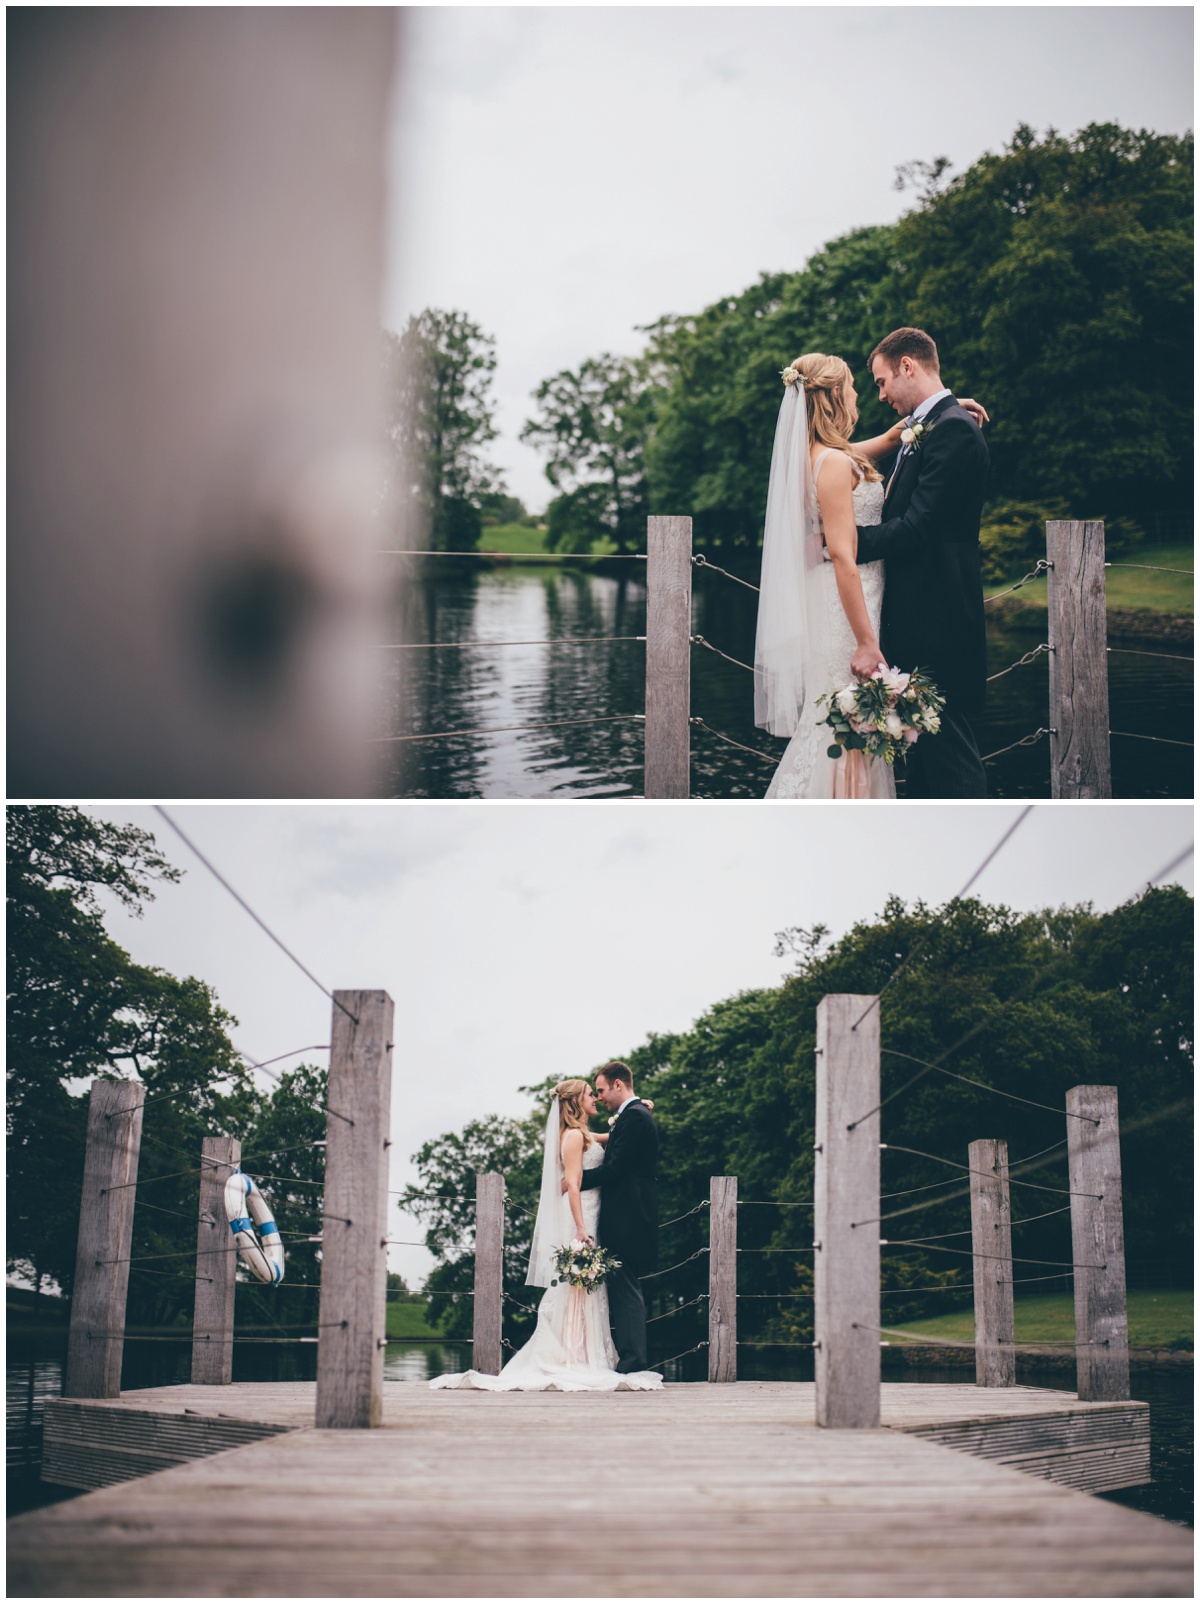 The bride and groom stand and cuddle on the jetty at Merrydale Manor.